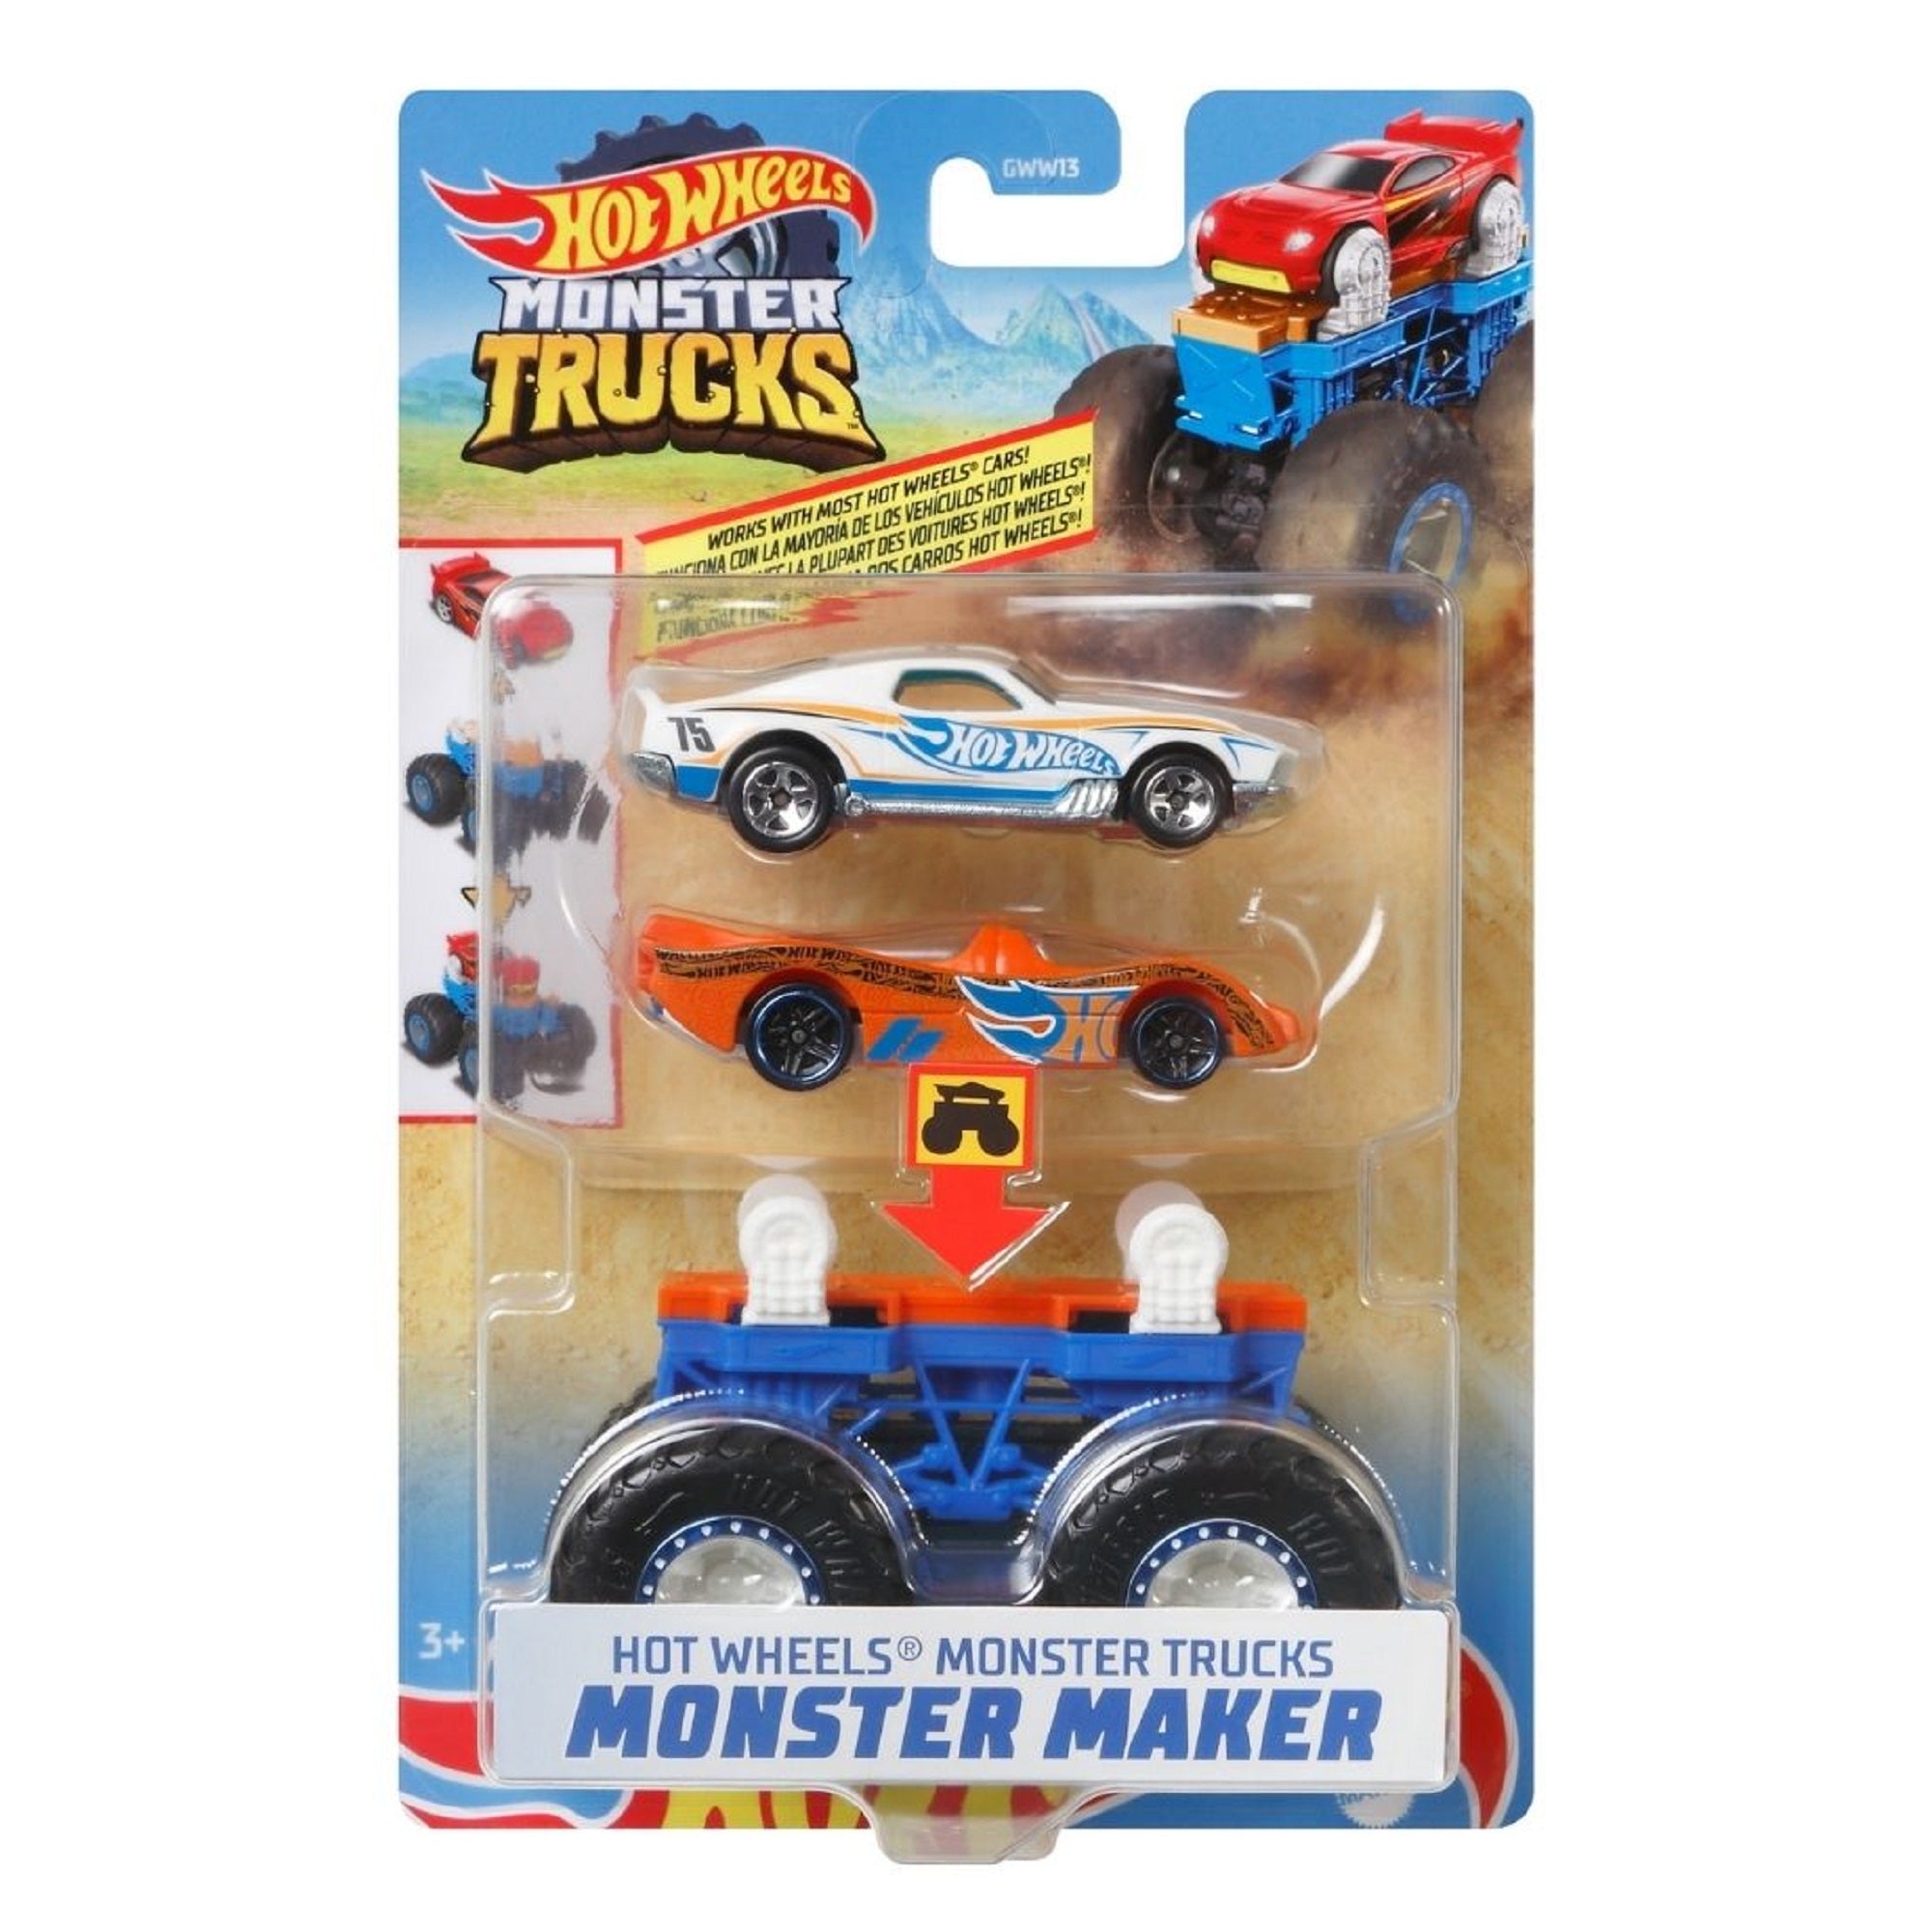 Tiger Shark (1: 15) Car on the control panel Hot Wheels Monster